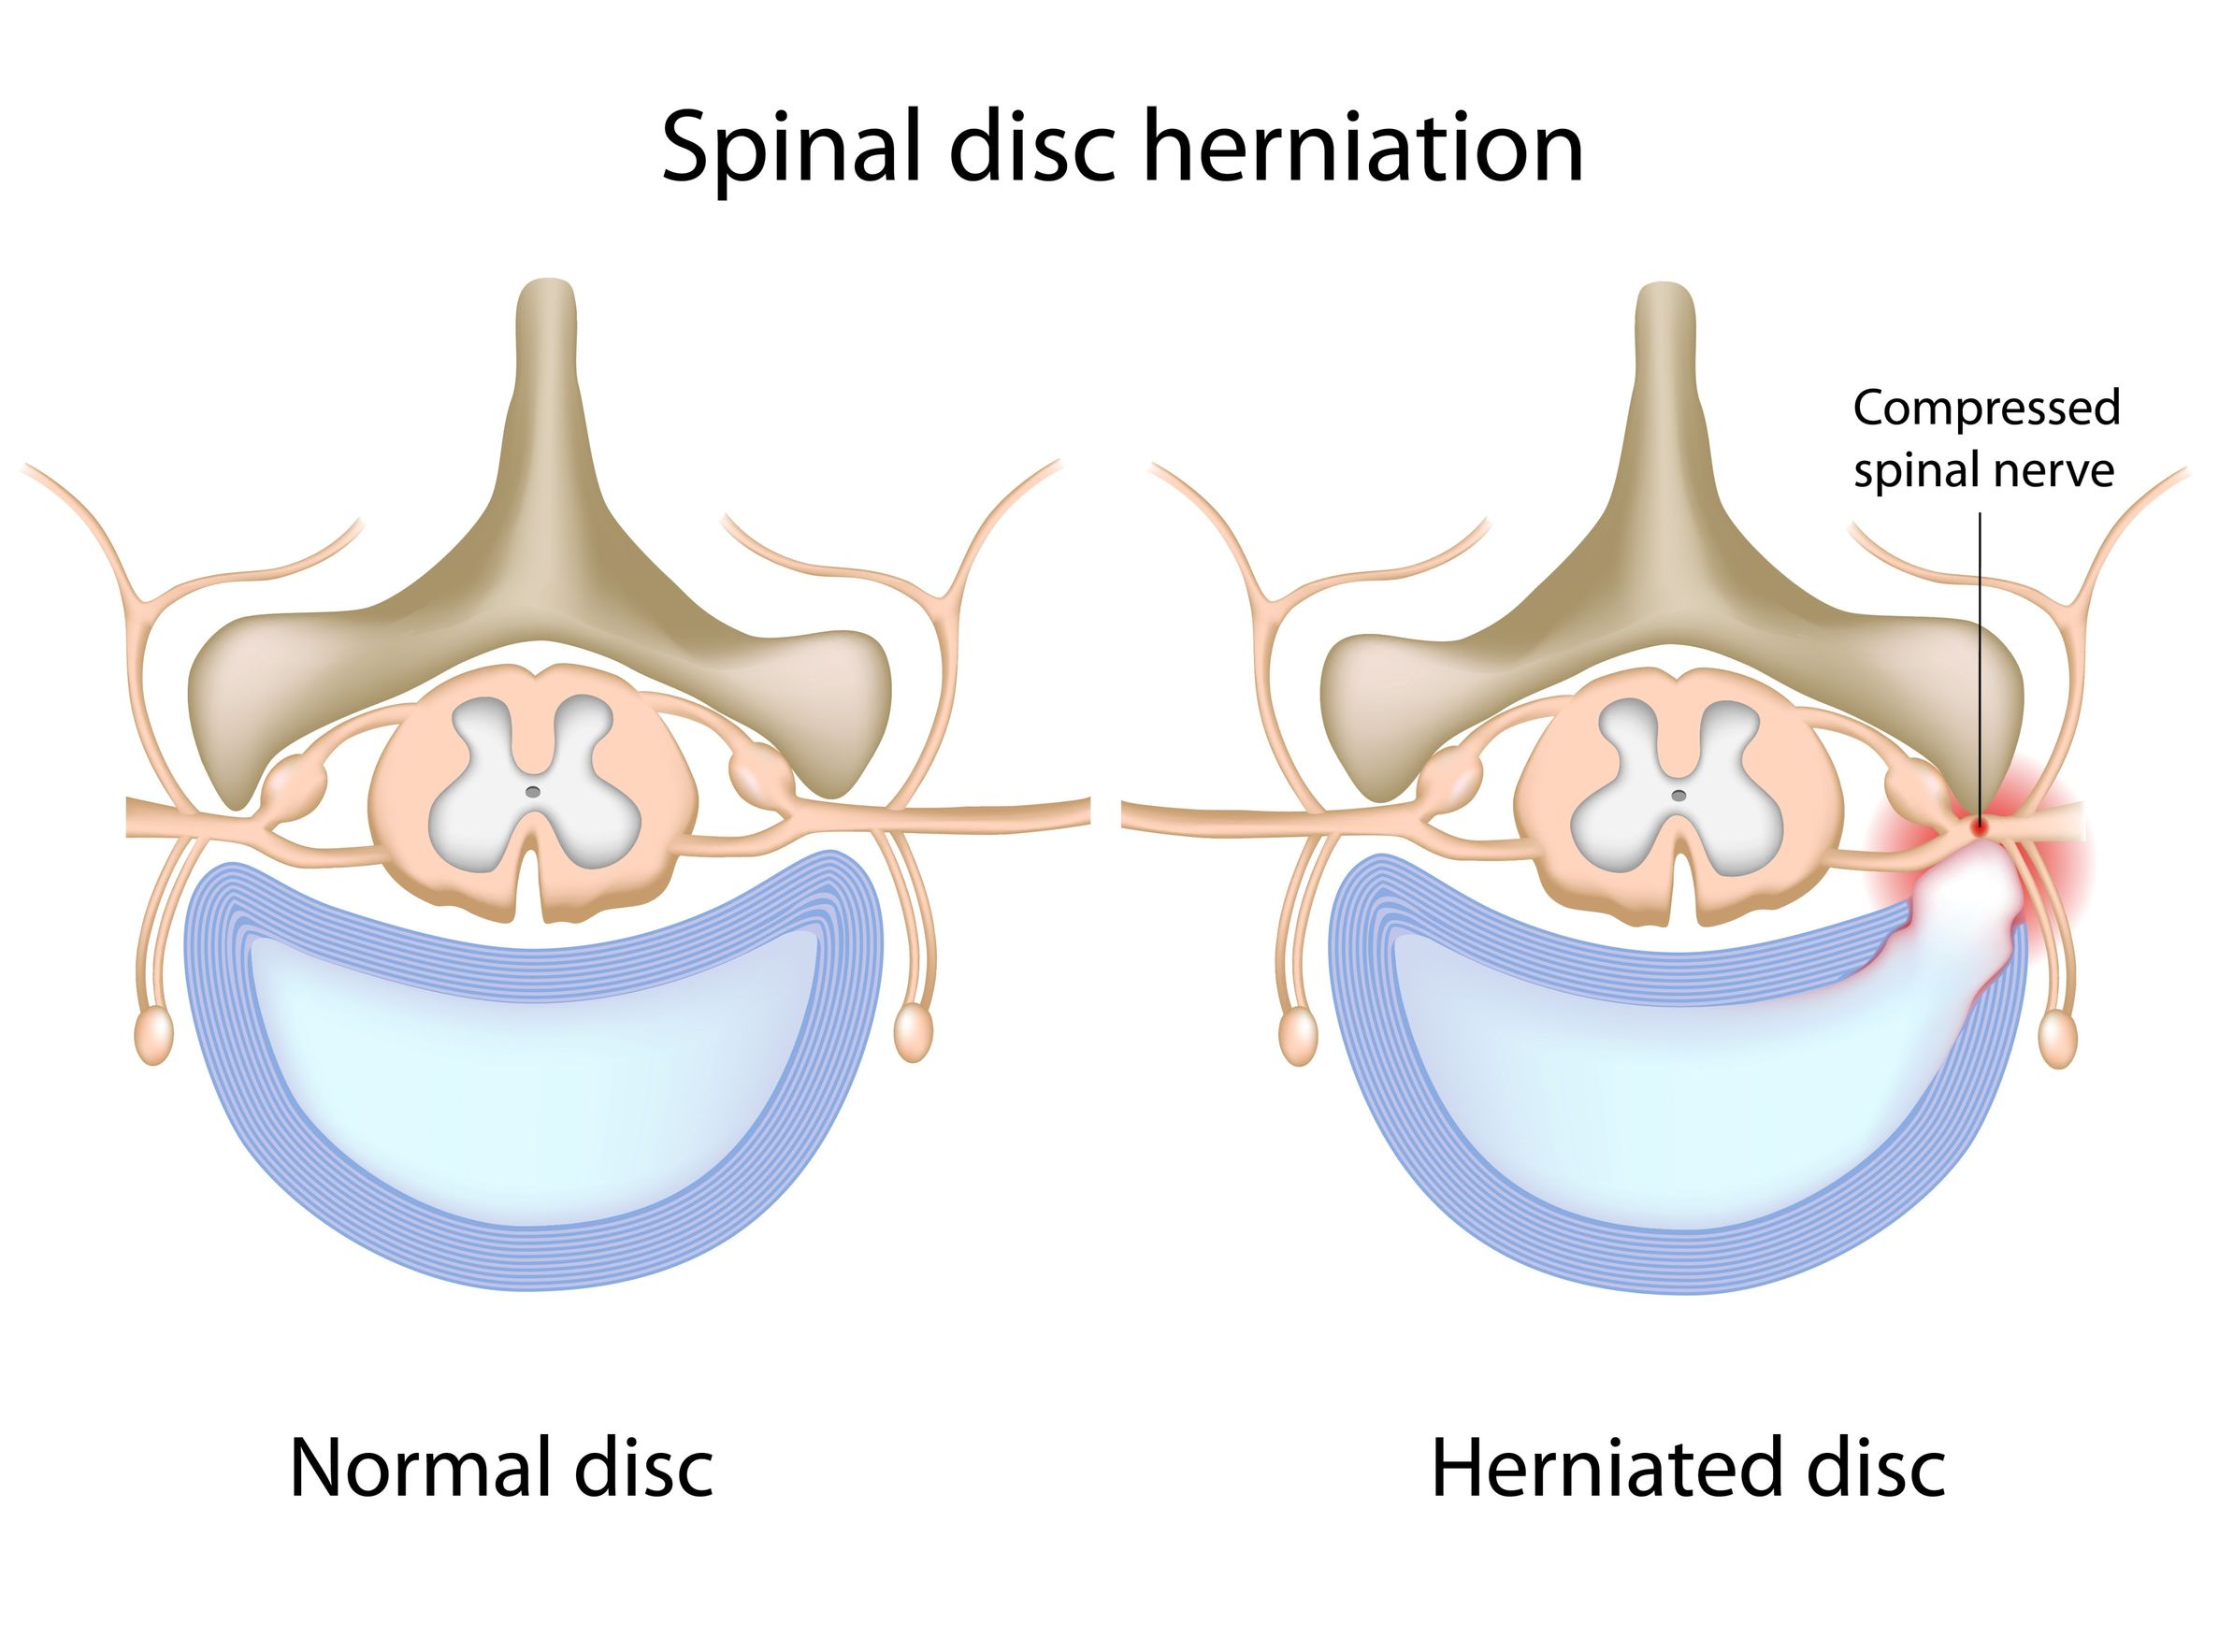 Spinal Disc Herniation Diagram - Normal Spinal Disc and Herniated Spinal Disc Diagram | https://physiologicnyc.com/chiropractic/